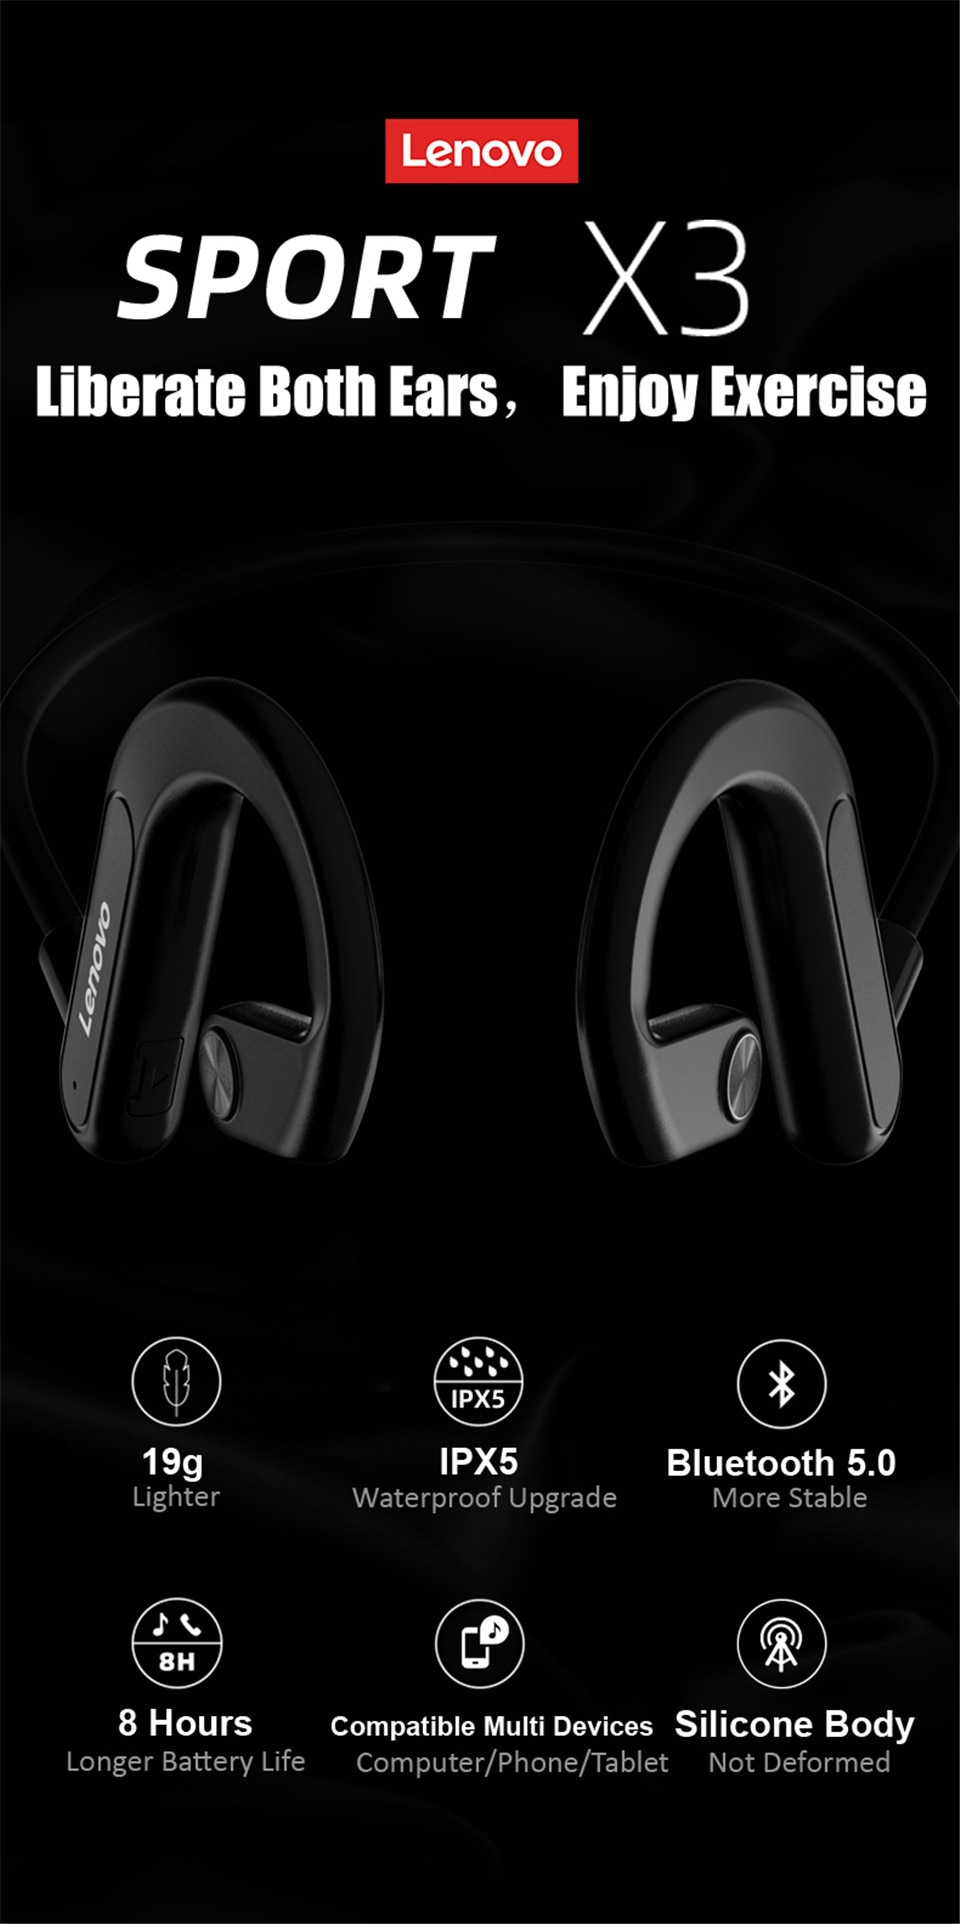 Lenovo X3 Wireless Bluetooth Earphone Bone Conduction Sport Headset IPX5 Waterproof Neckband Earbuds with Mic Noise Cancelling 